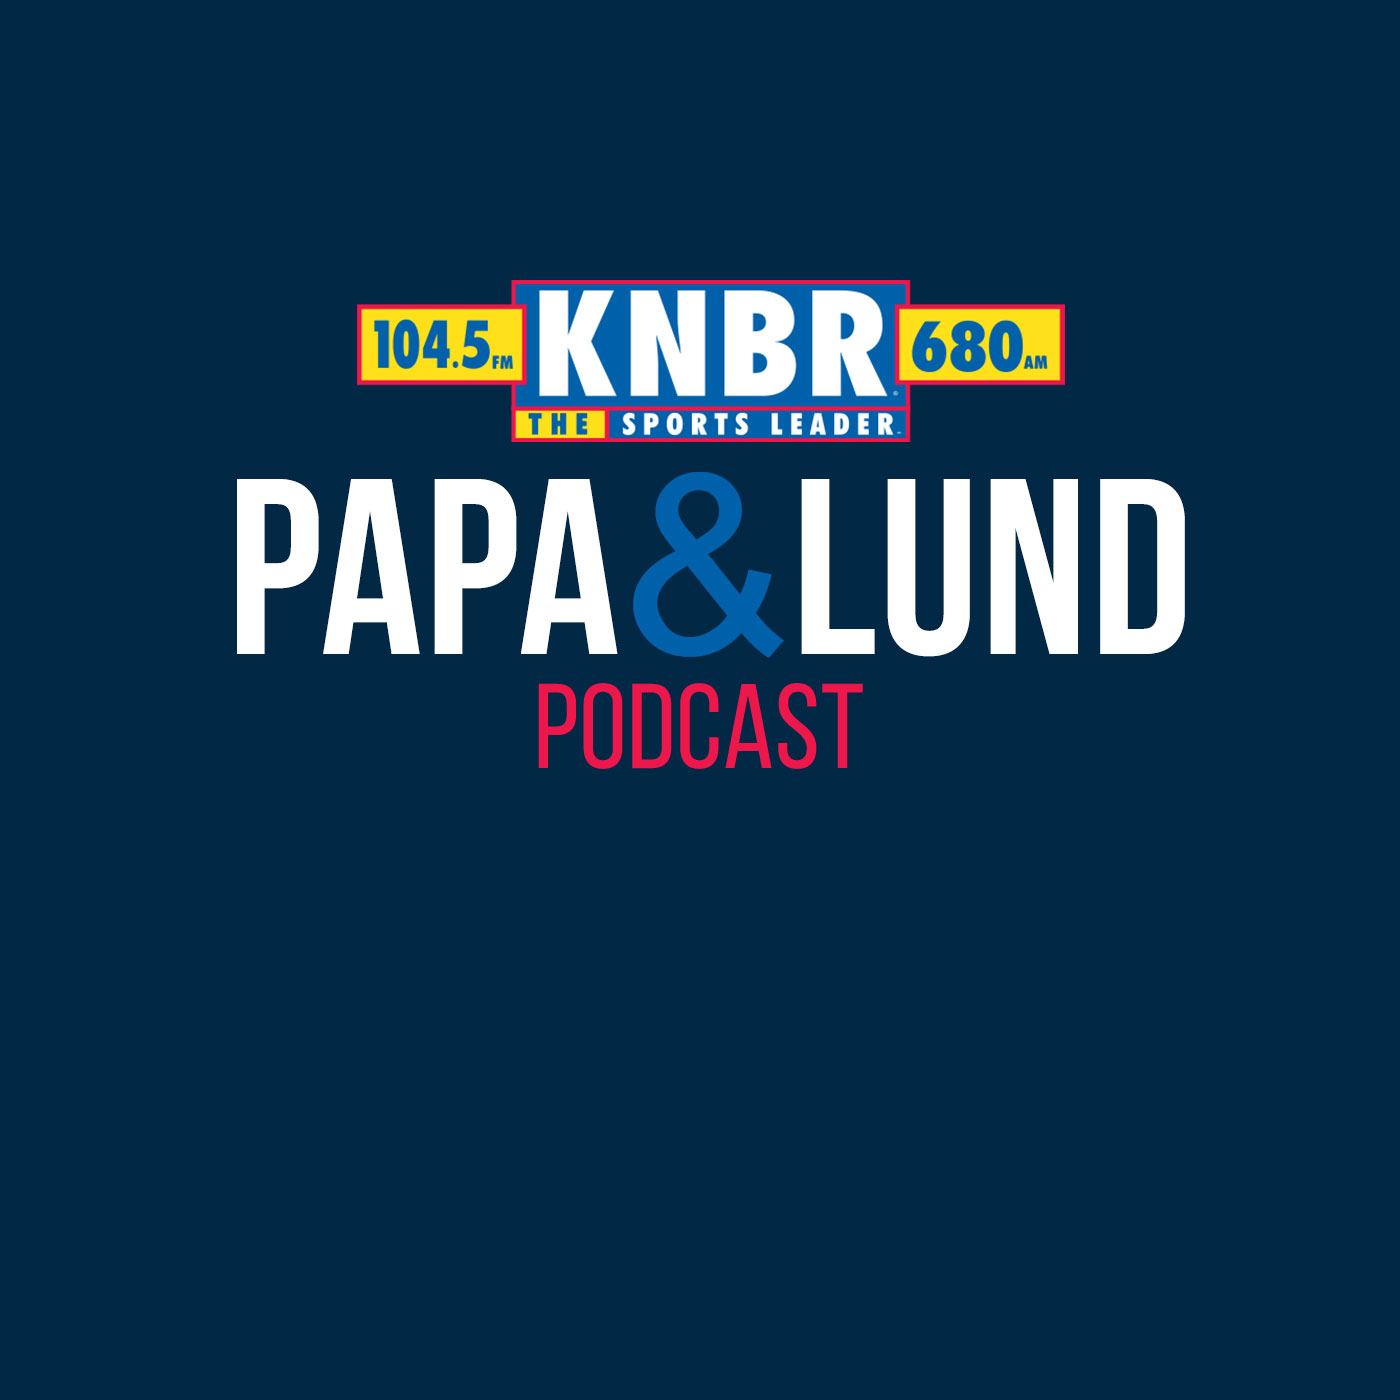 2-6 Andrew Siciliano joins Papa & Lund to discuss the Superbowl matchup between the Eagles and Chiefs